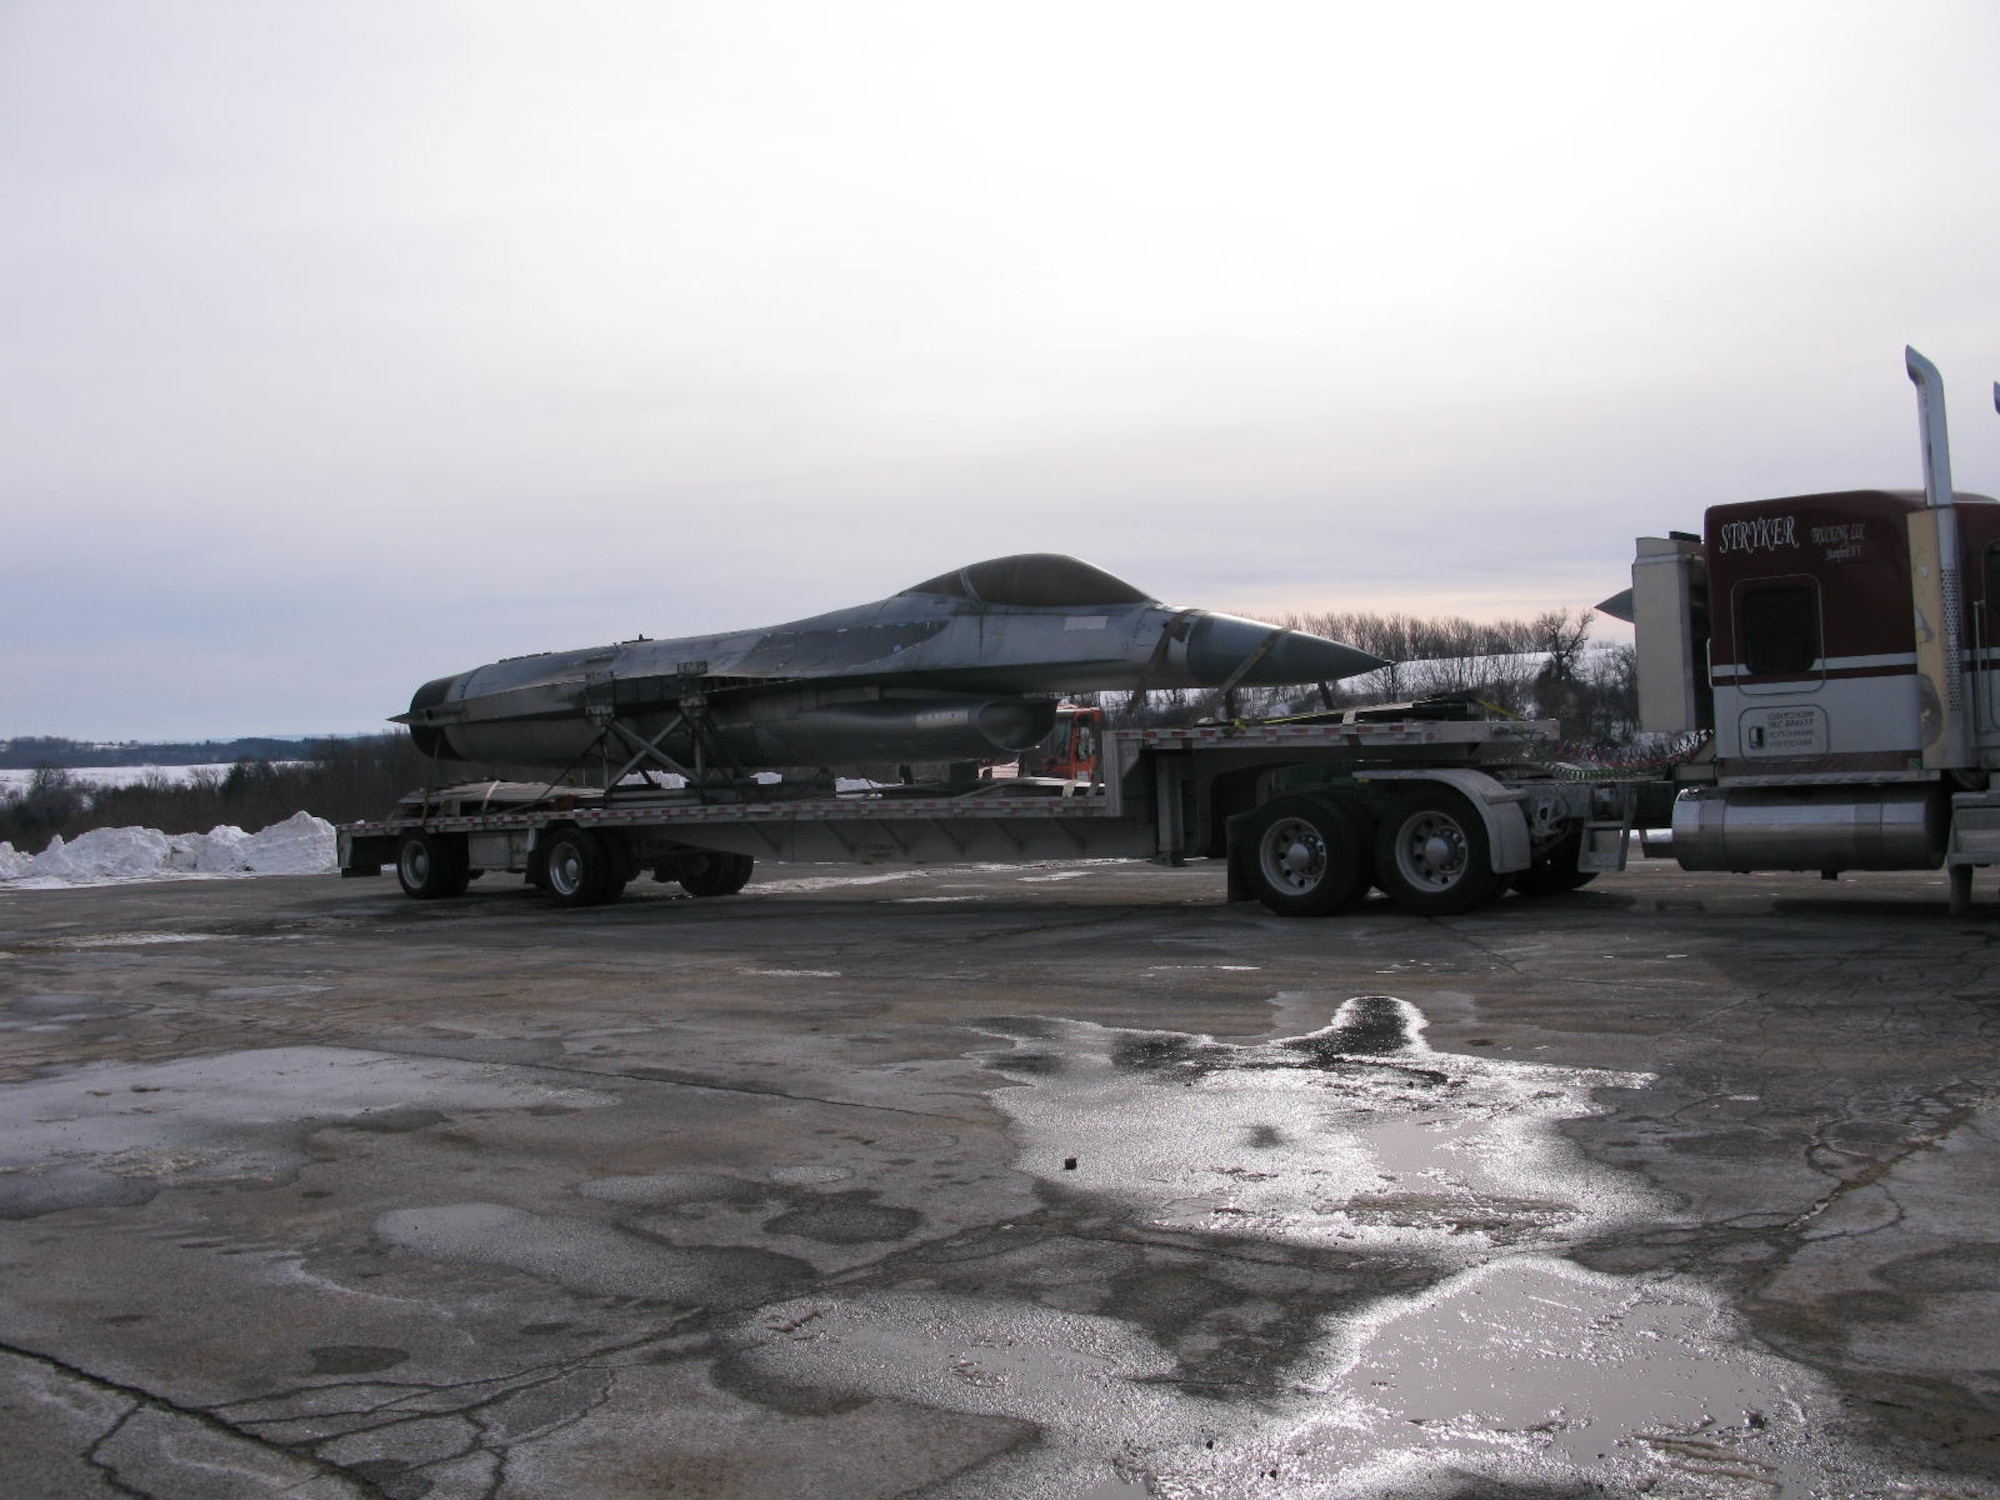 The YF-16 loaded on a trailer for the trip to Fort Worth, Texas. (Courtesy photo)